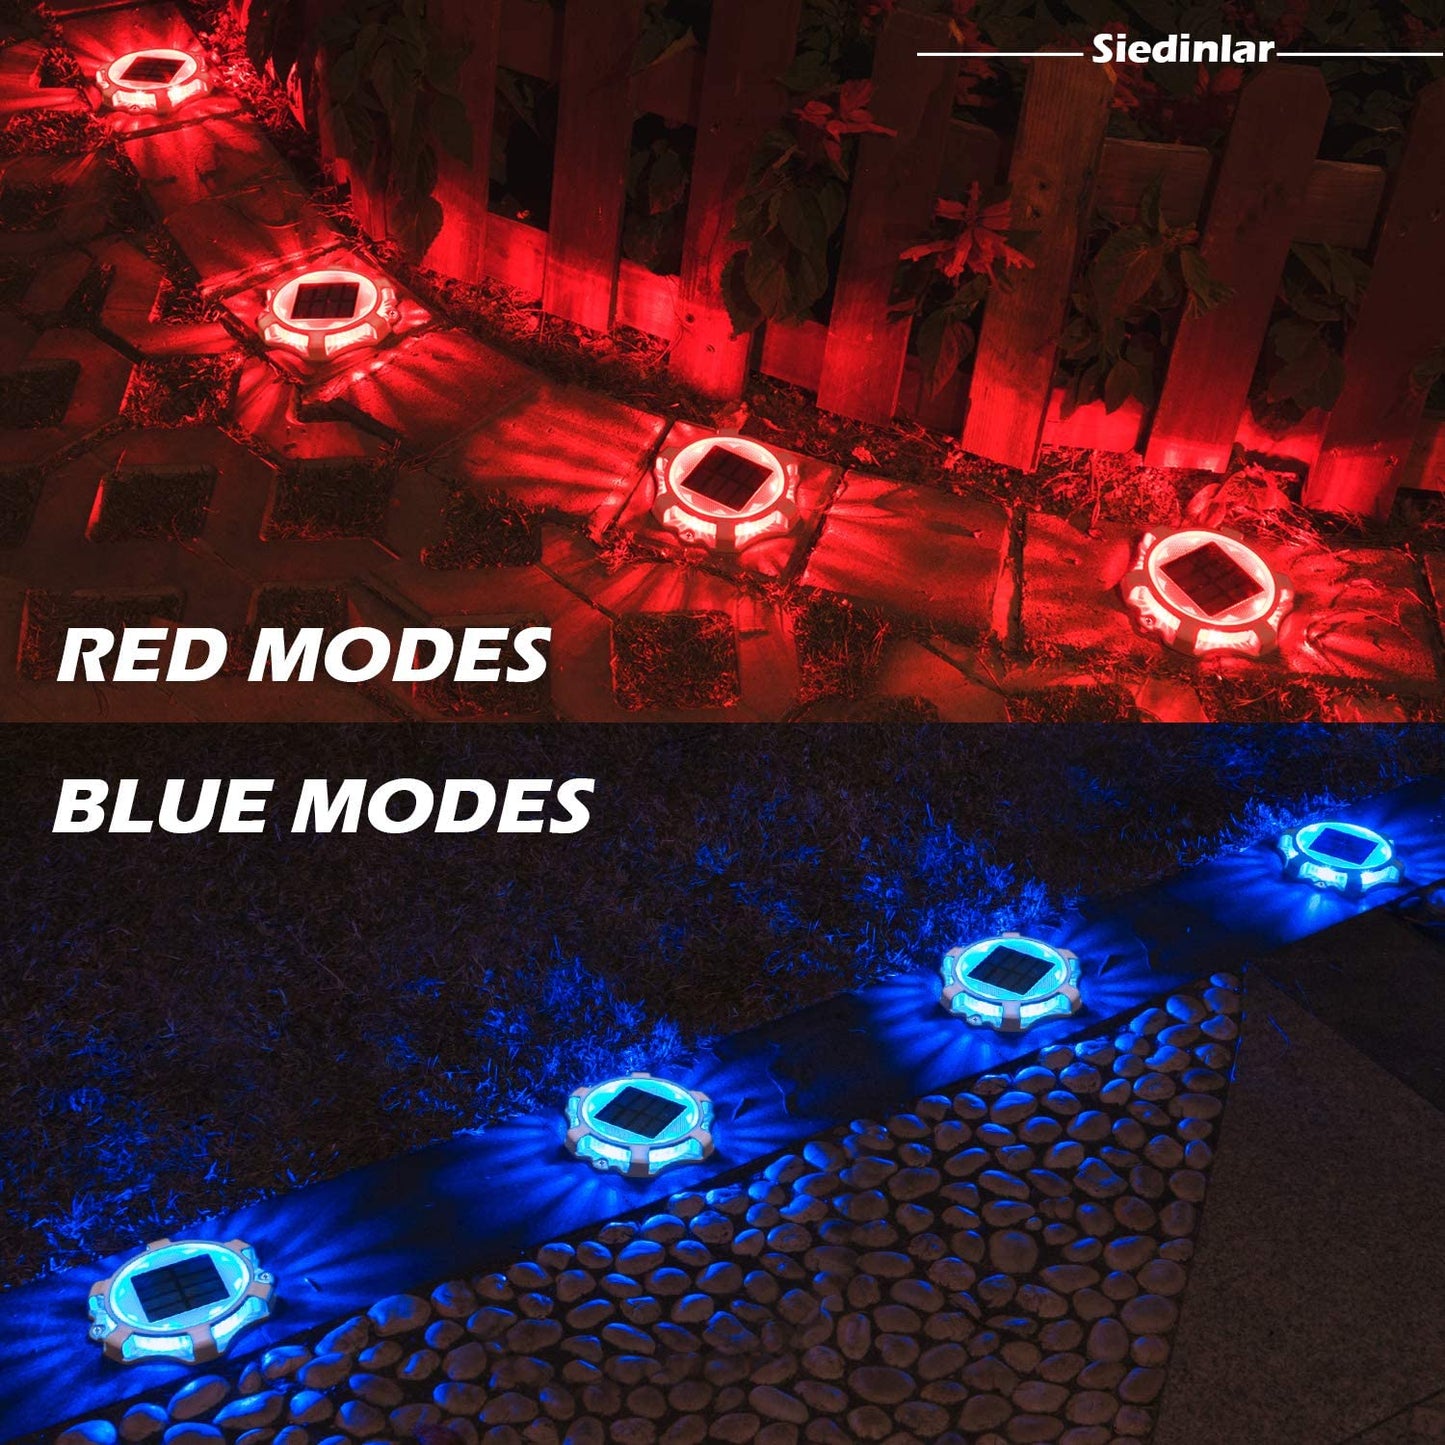 Siedinlar SD0312BR Solar Deck Lights Outdoor 2 Modes LED Driveway Markers Dock Light Solar Powered Waterproof for Step Walkway Ground Stair Pathway Yard Road Garden 4 Pack (Blue/Red)